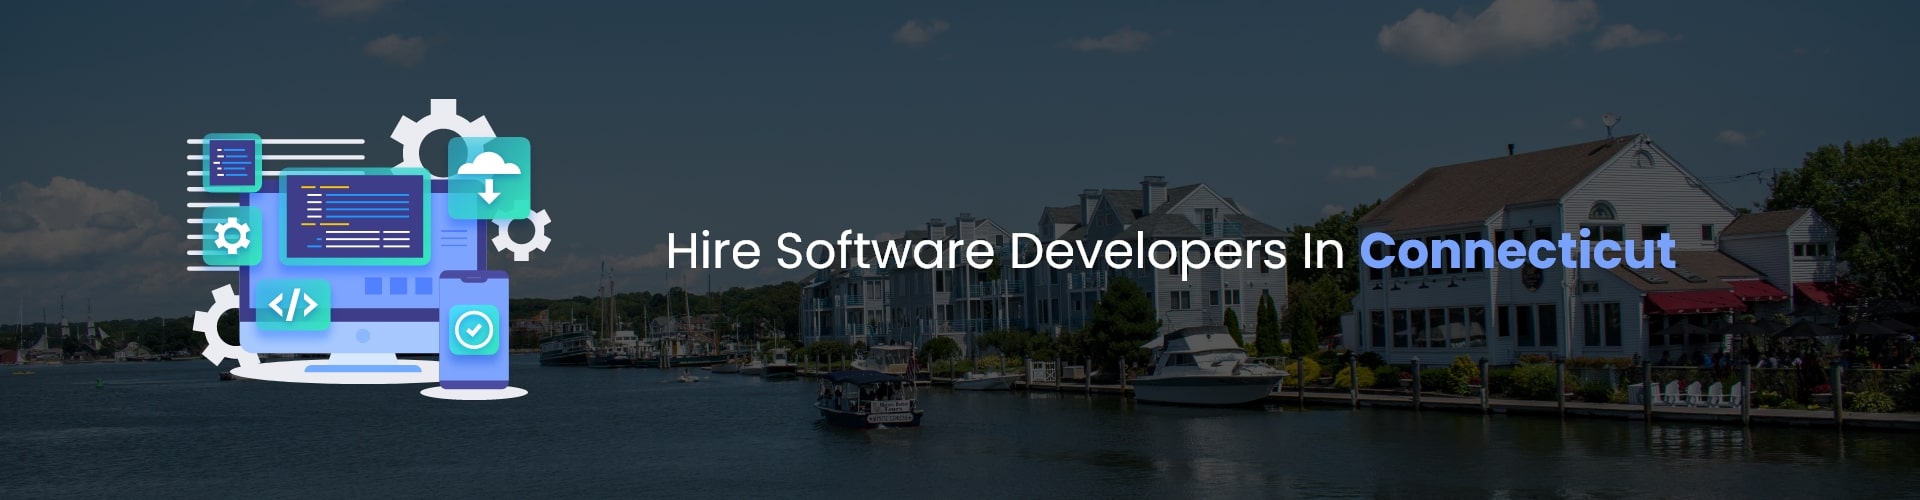 hire software developers in connecticut